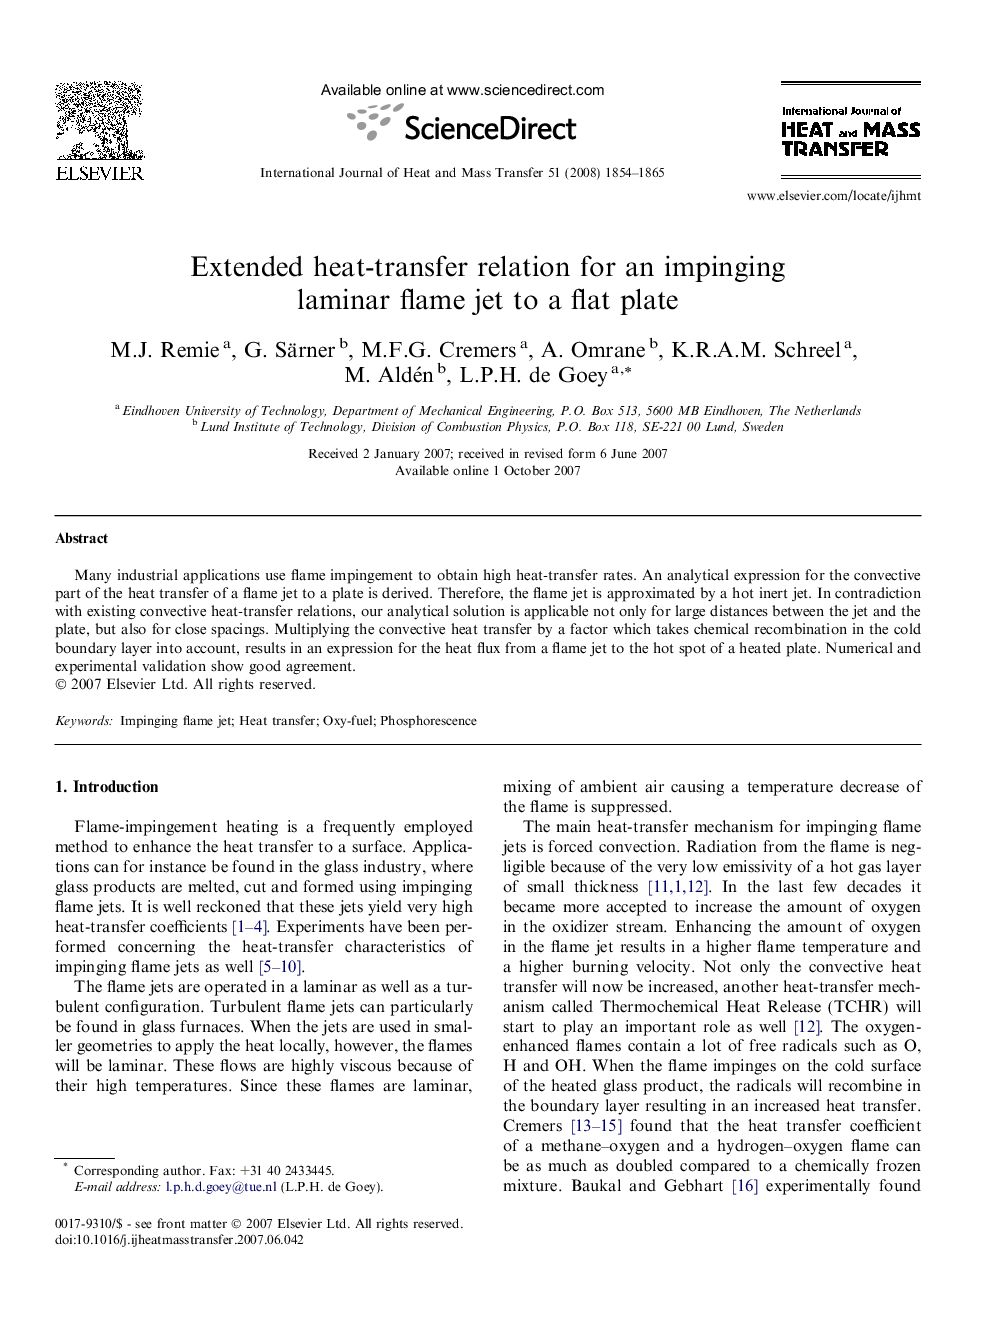 Extended heat-transfer relation for an impinging laminar flame jet to a flat plate